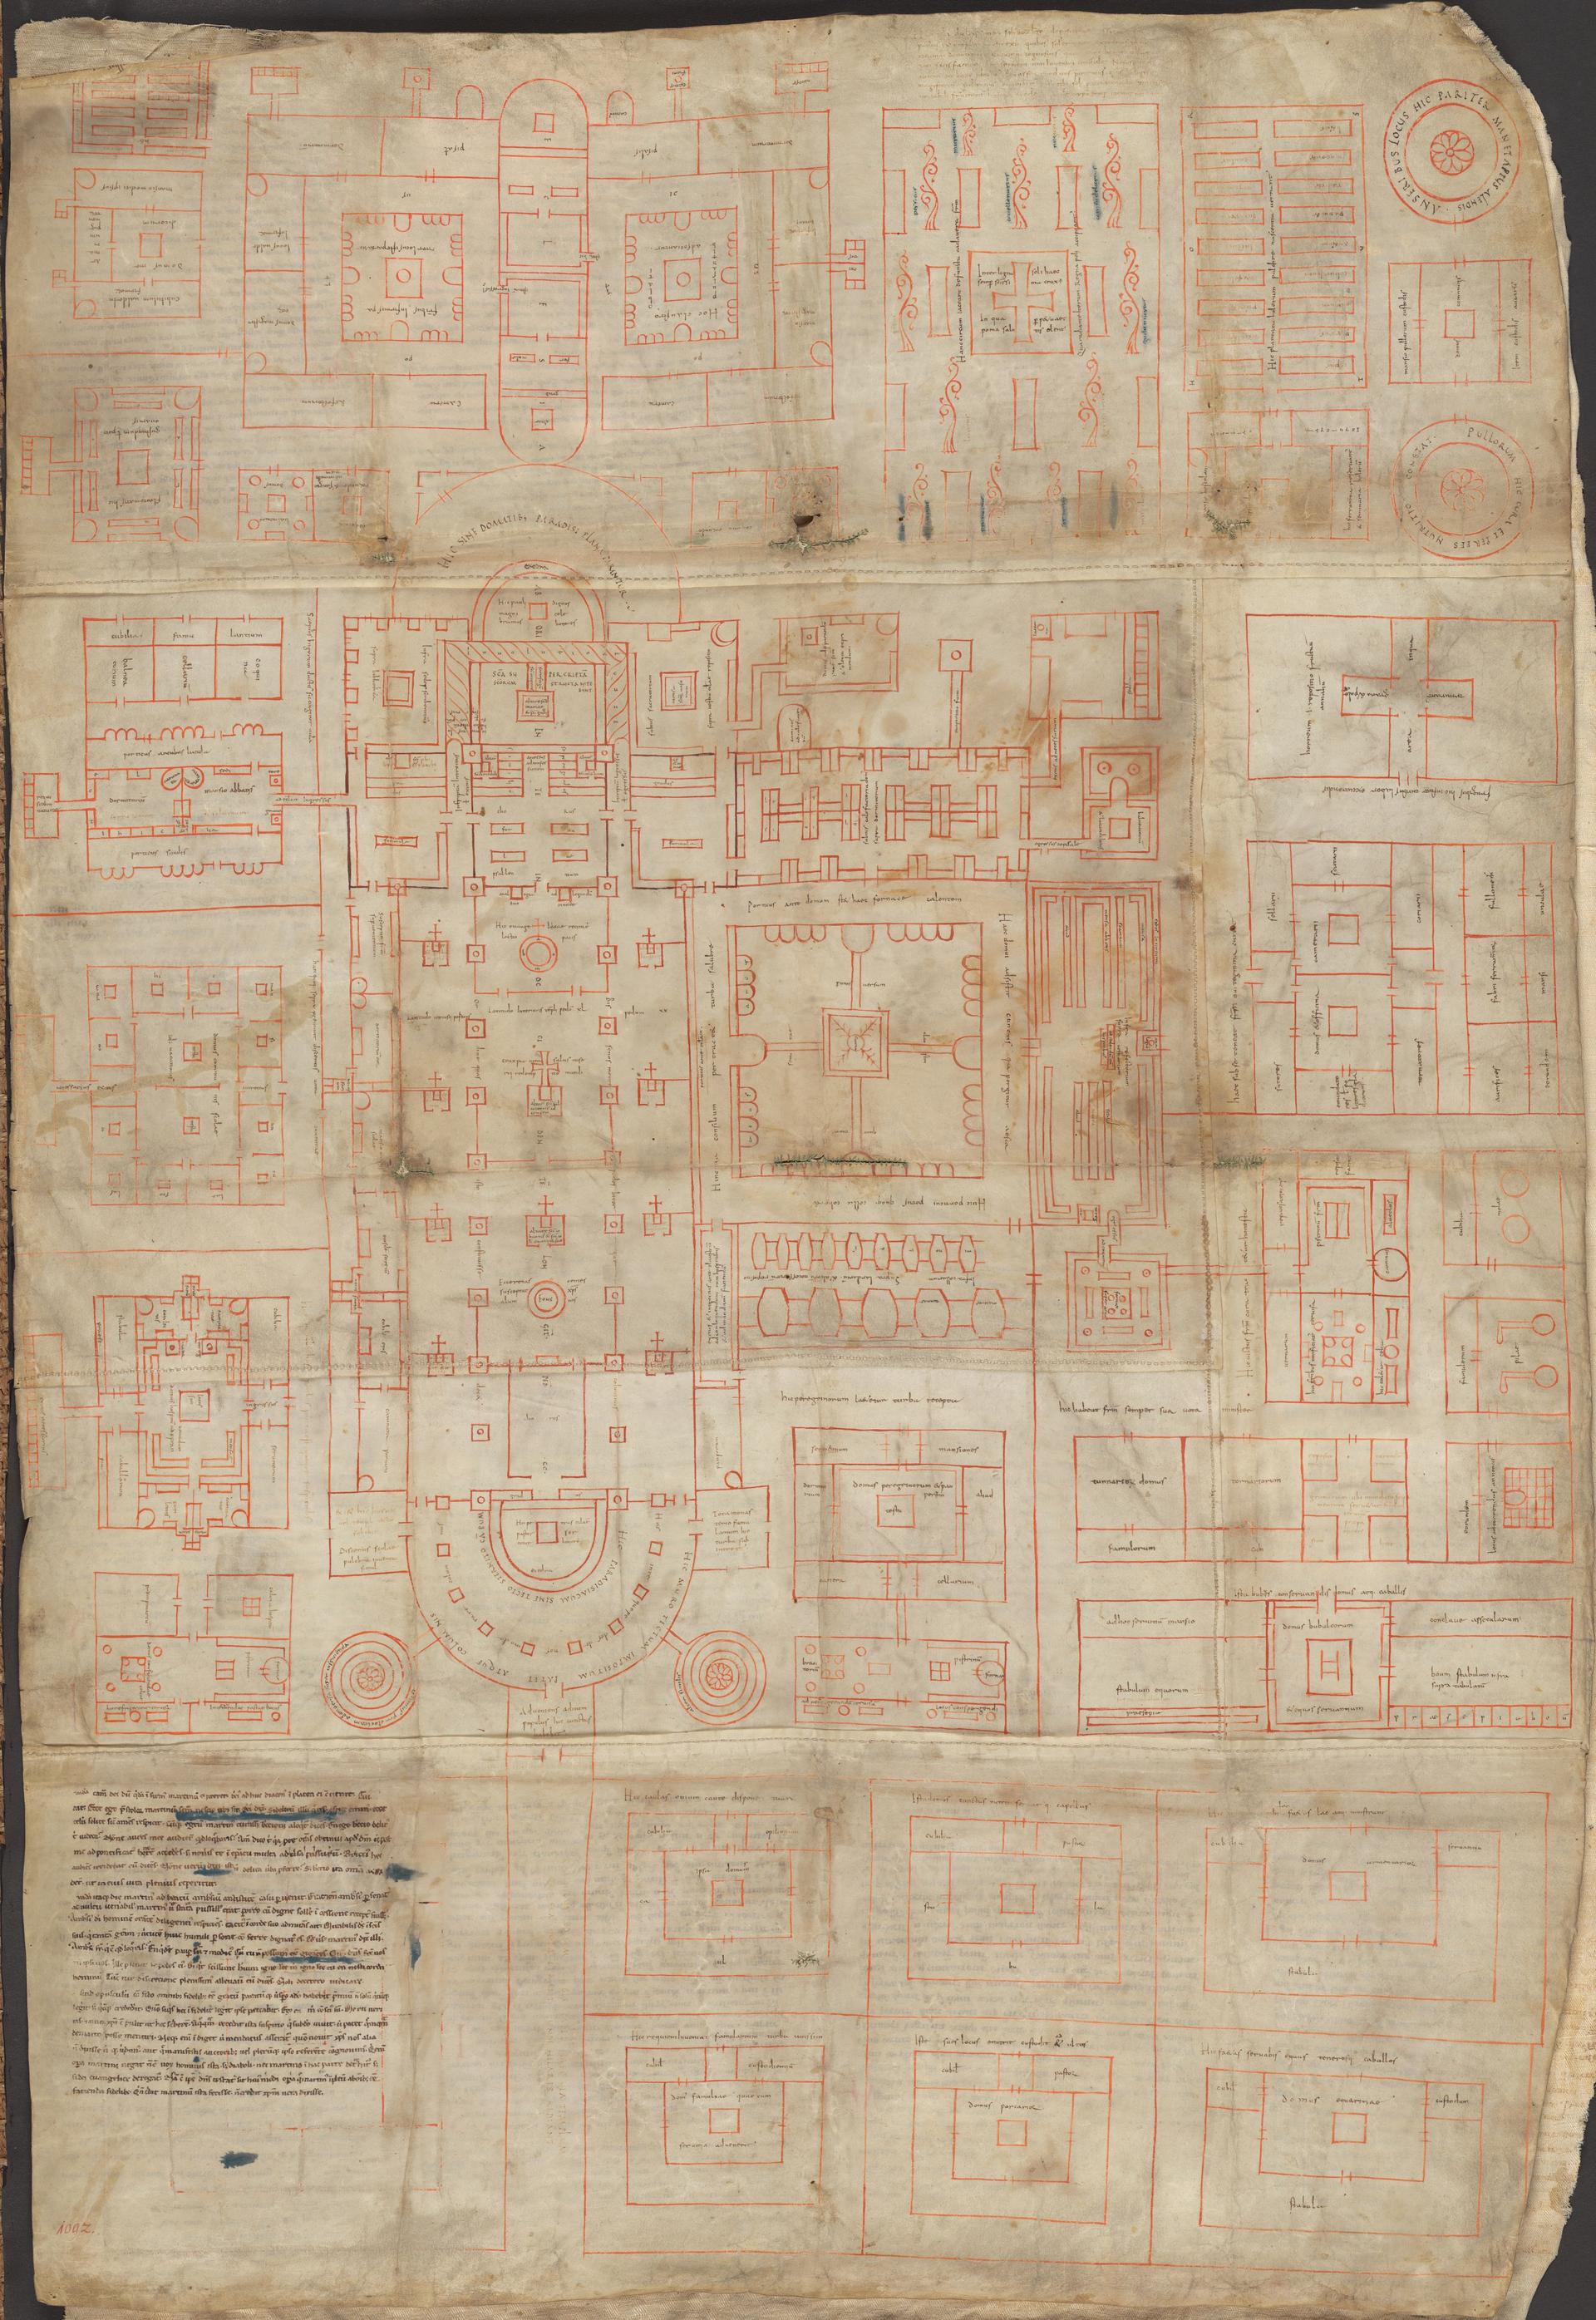 The blueprint of a Benedictine cloister being replicated by carpenters in Southern Germany.